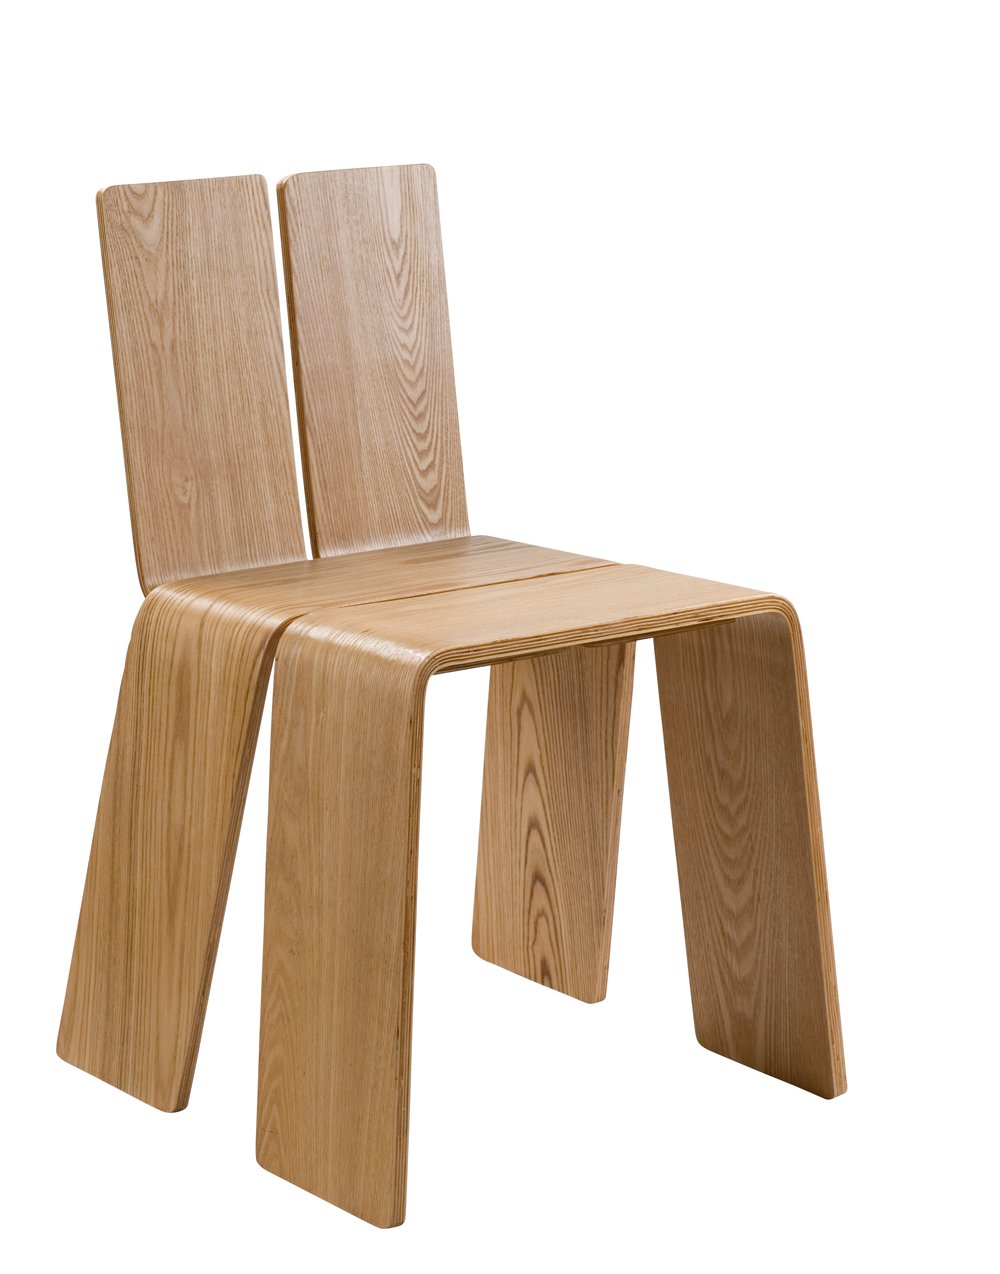 contempo natural finish dining chair